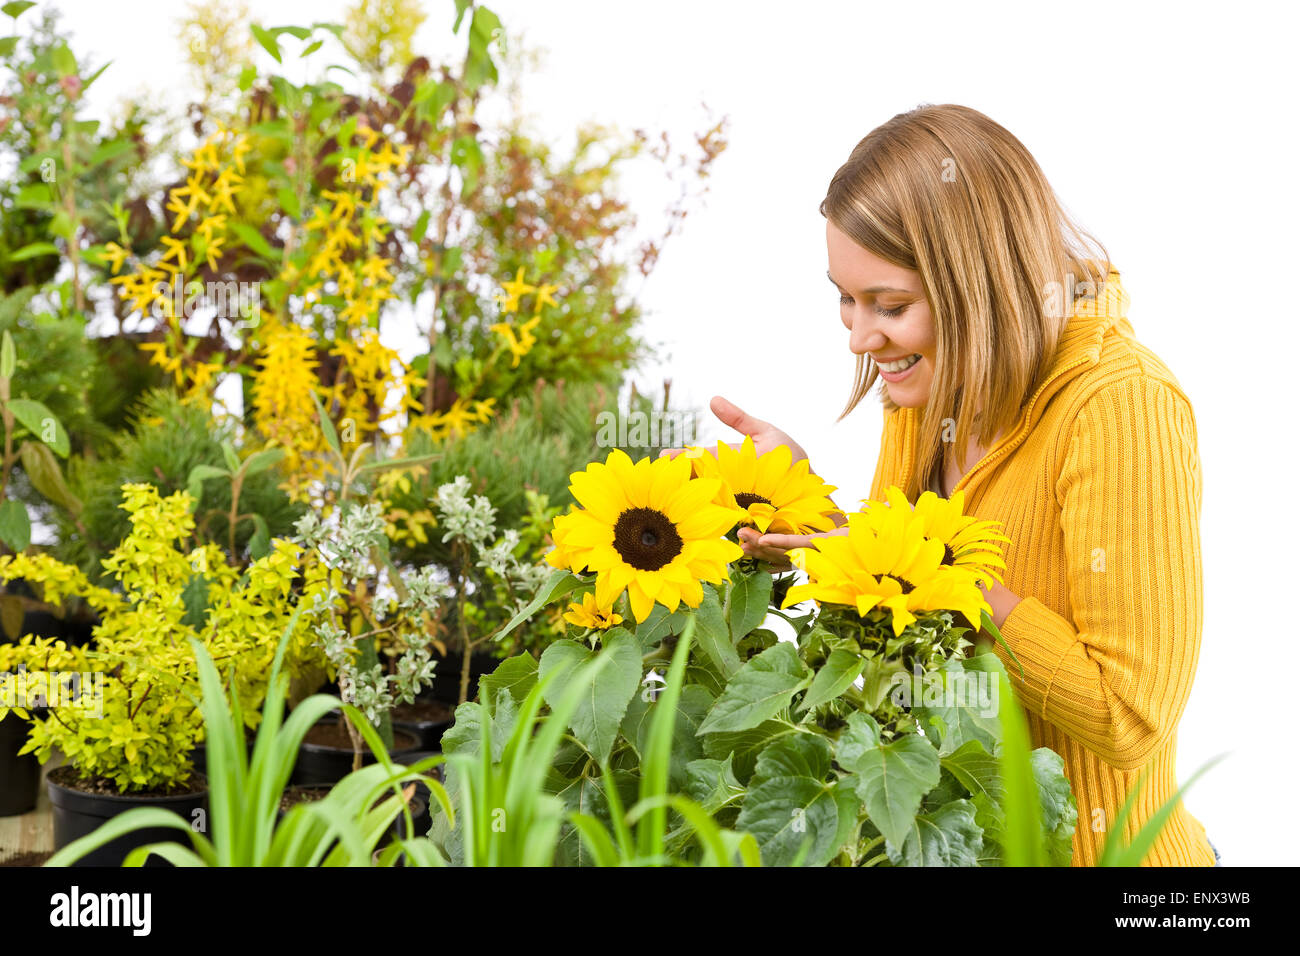 Gardening - portrait of woman with sunflowers Stock Photo